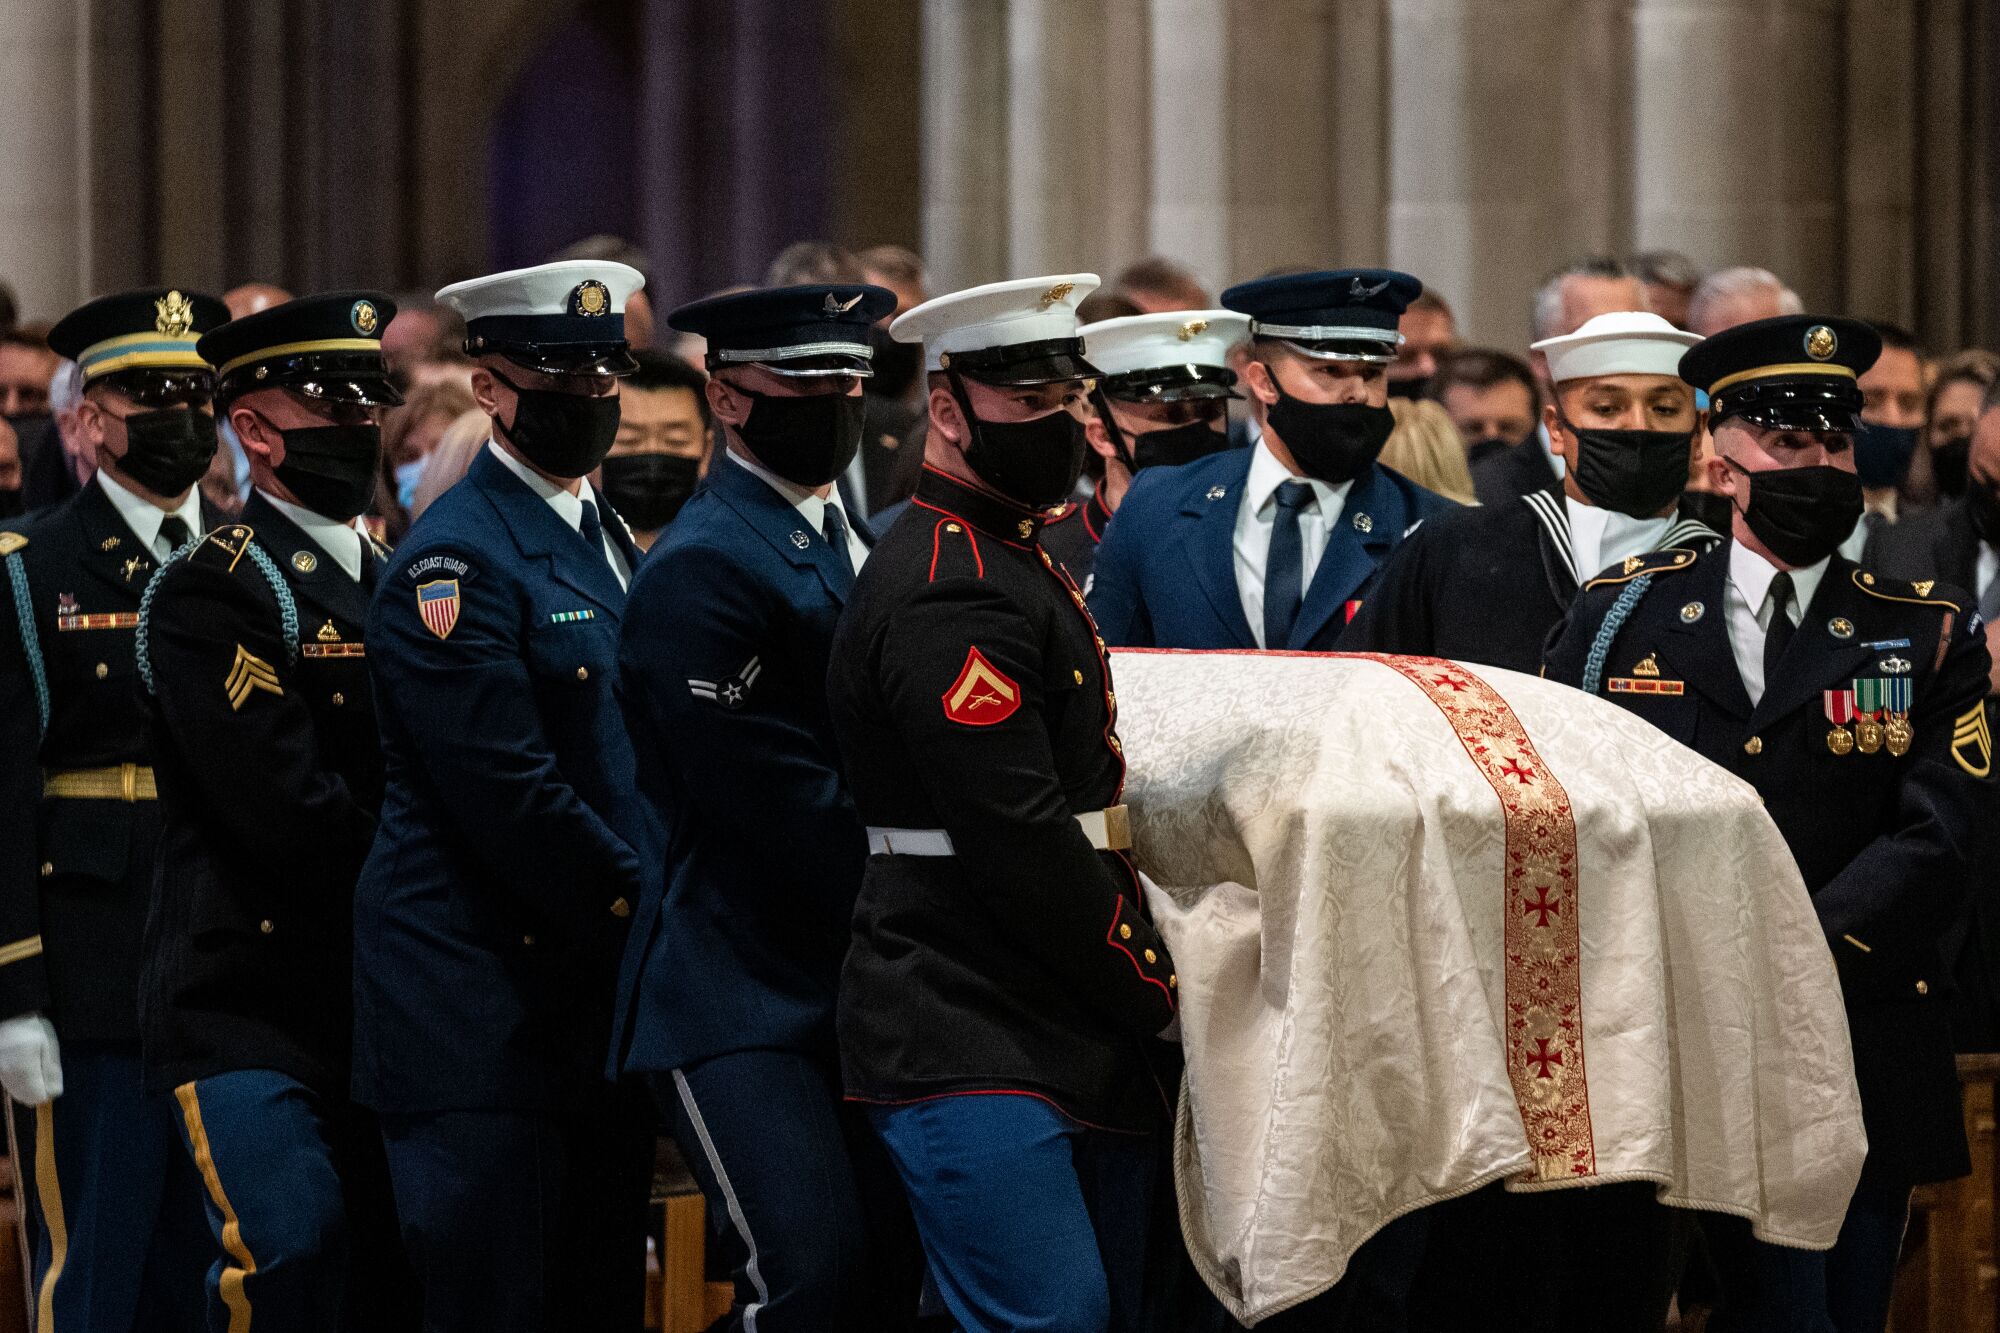 The funeral for Bob Dole at Washington National Cathedral.